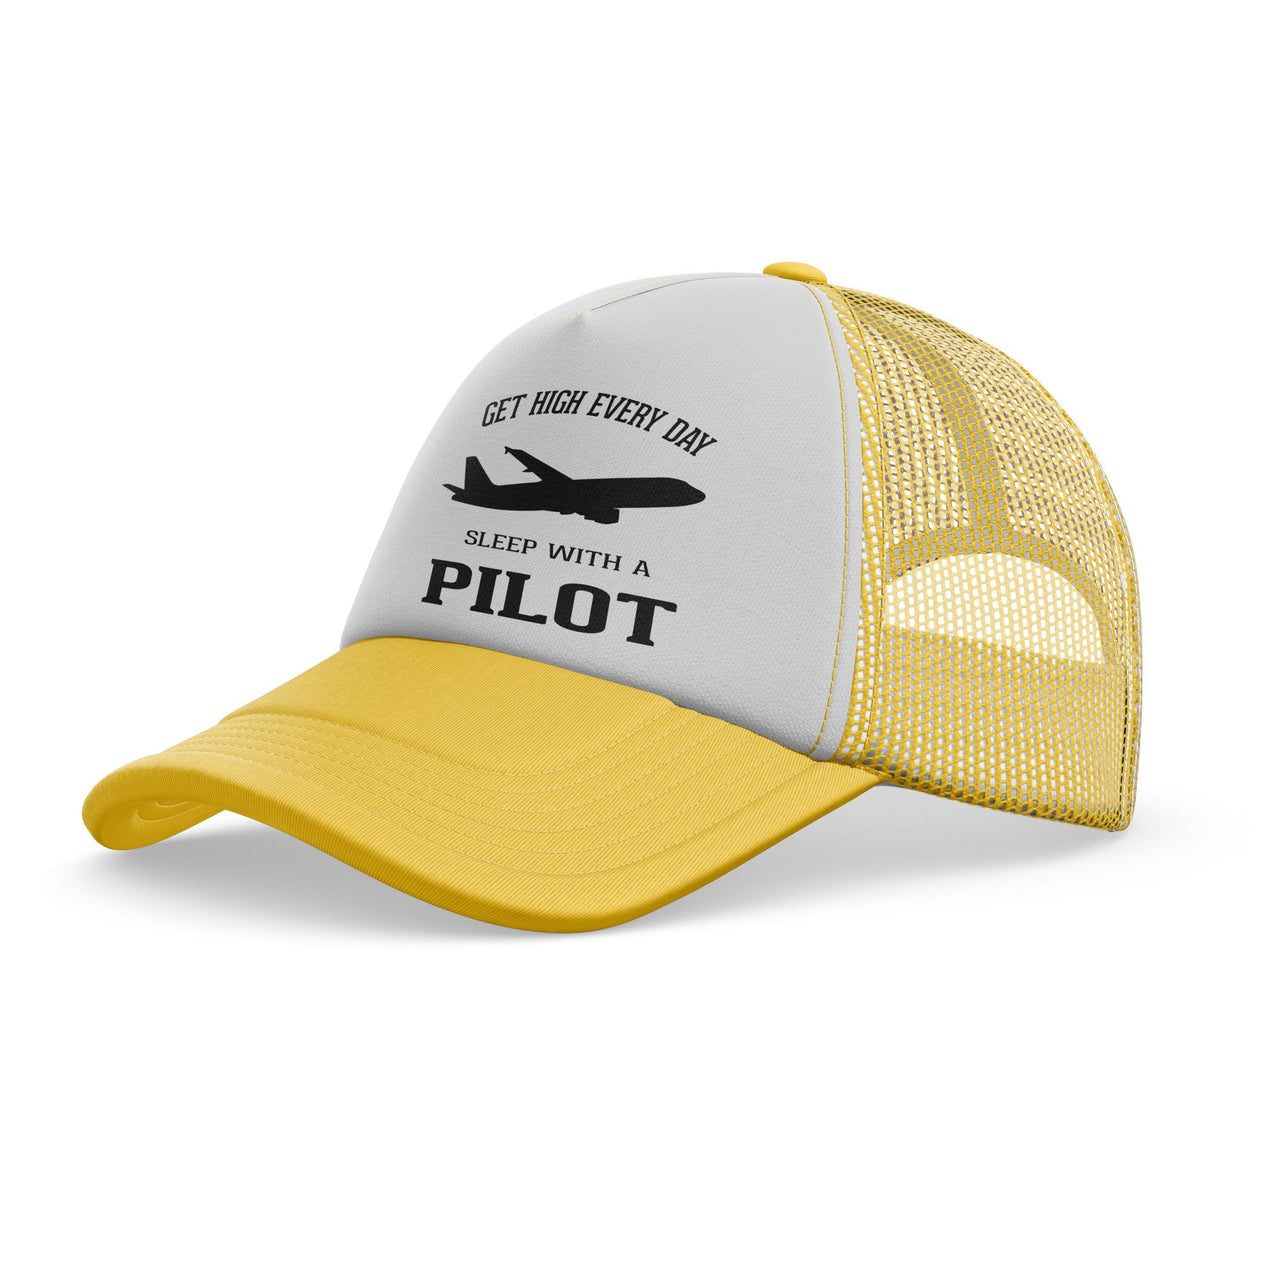 Get High Every Day Sleep With A Pilot Designed Trucker Caps & Hats